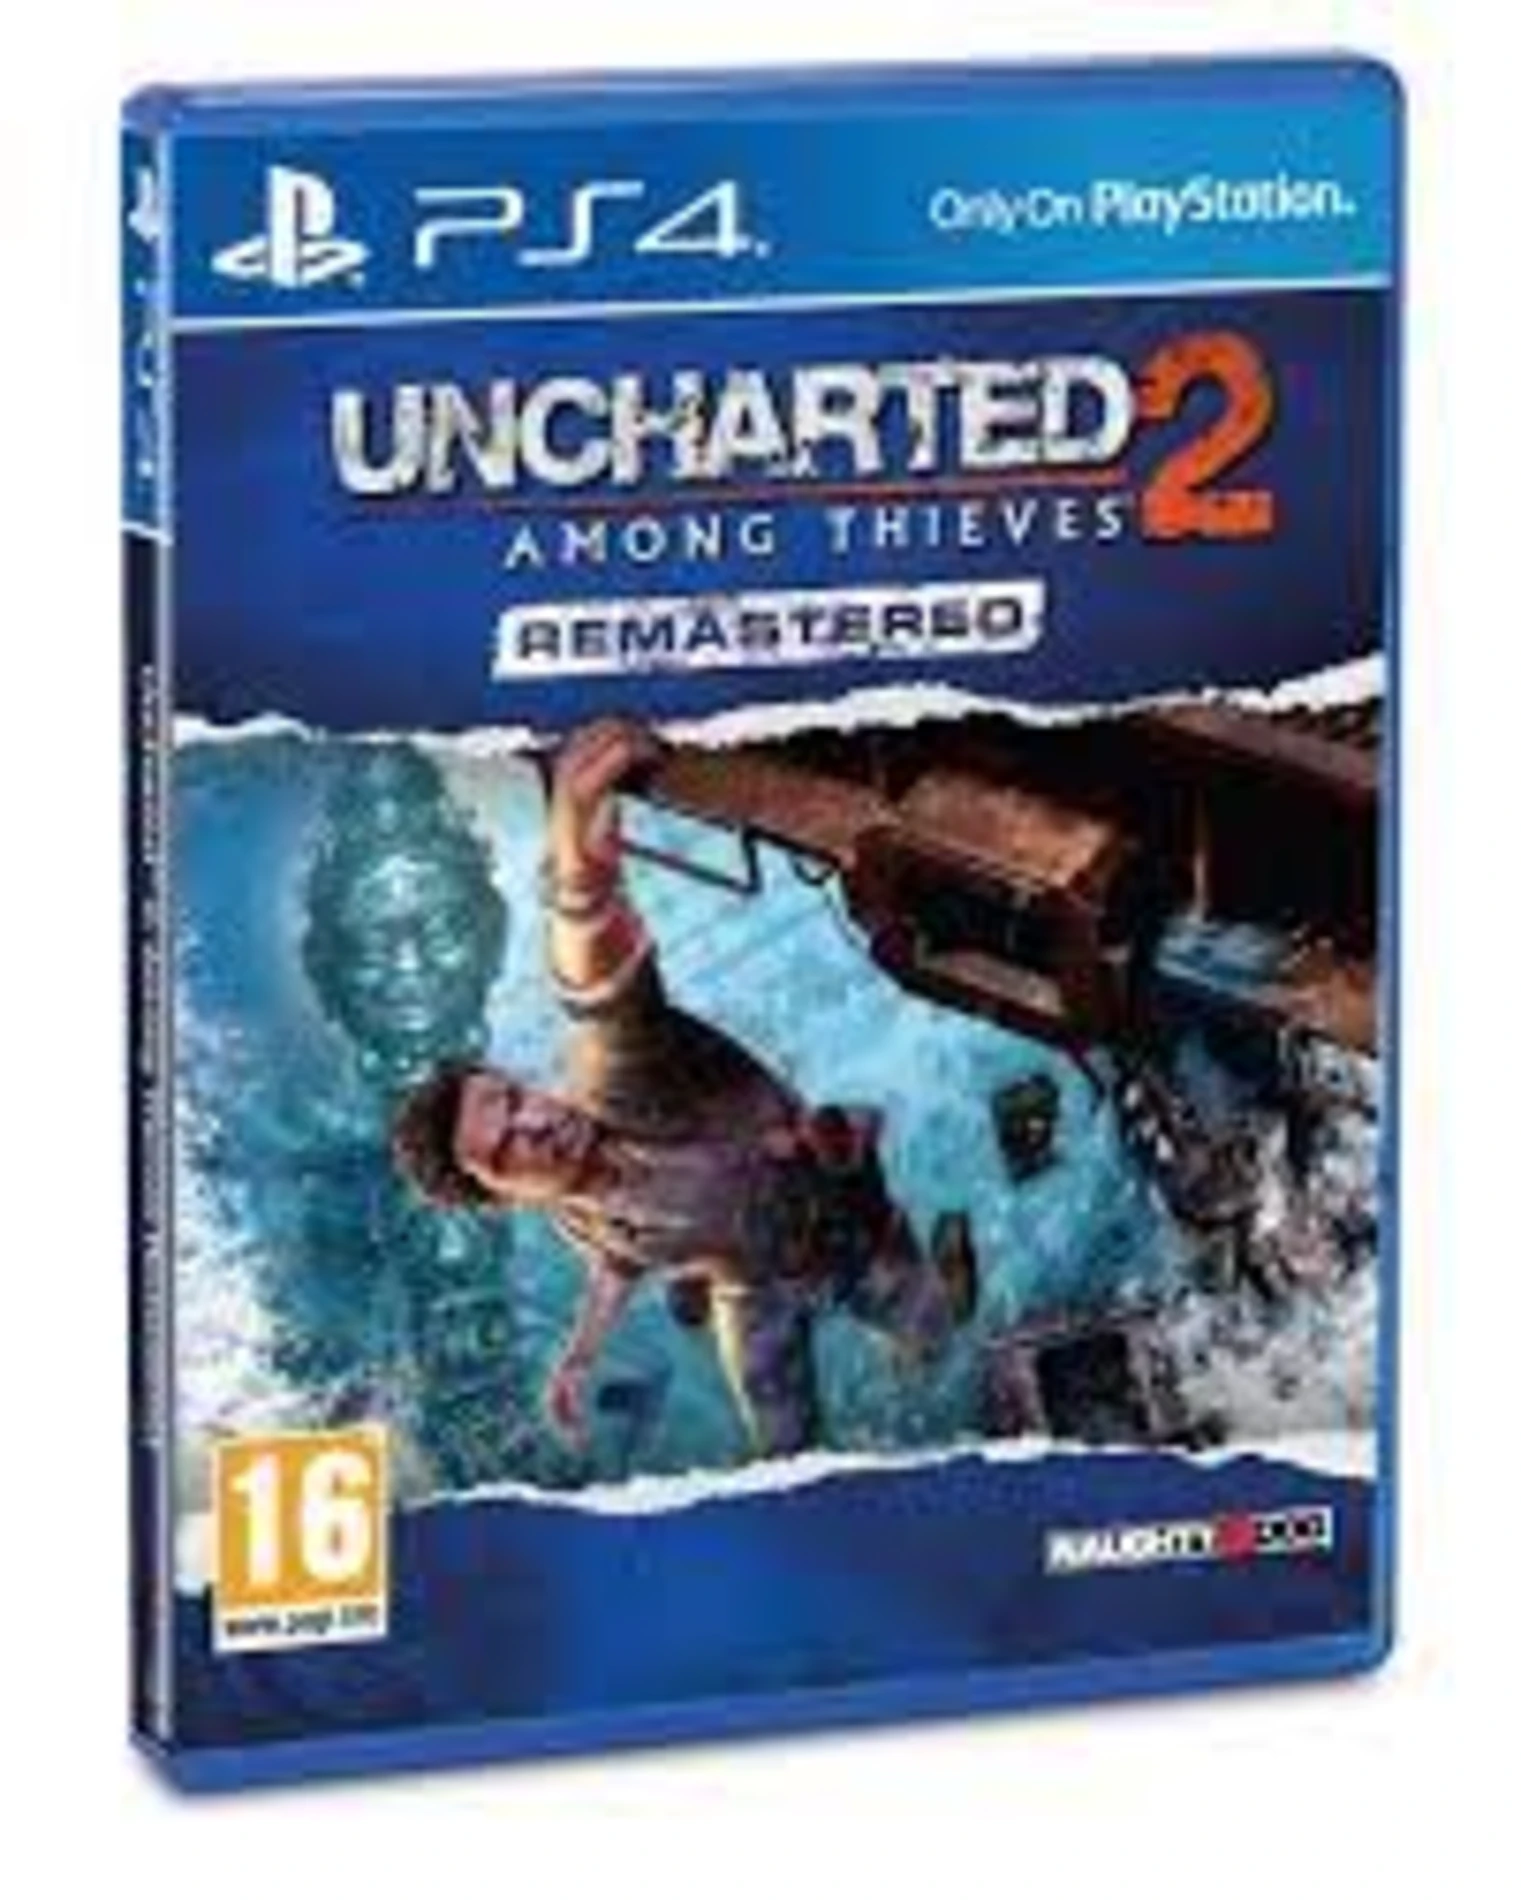 Uncharted 2 Amazing Thieves  - Ps4 Oyun [SIFIR]